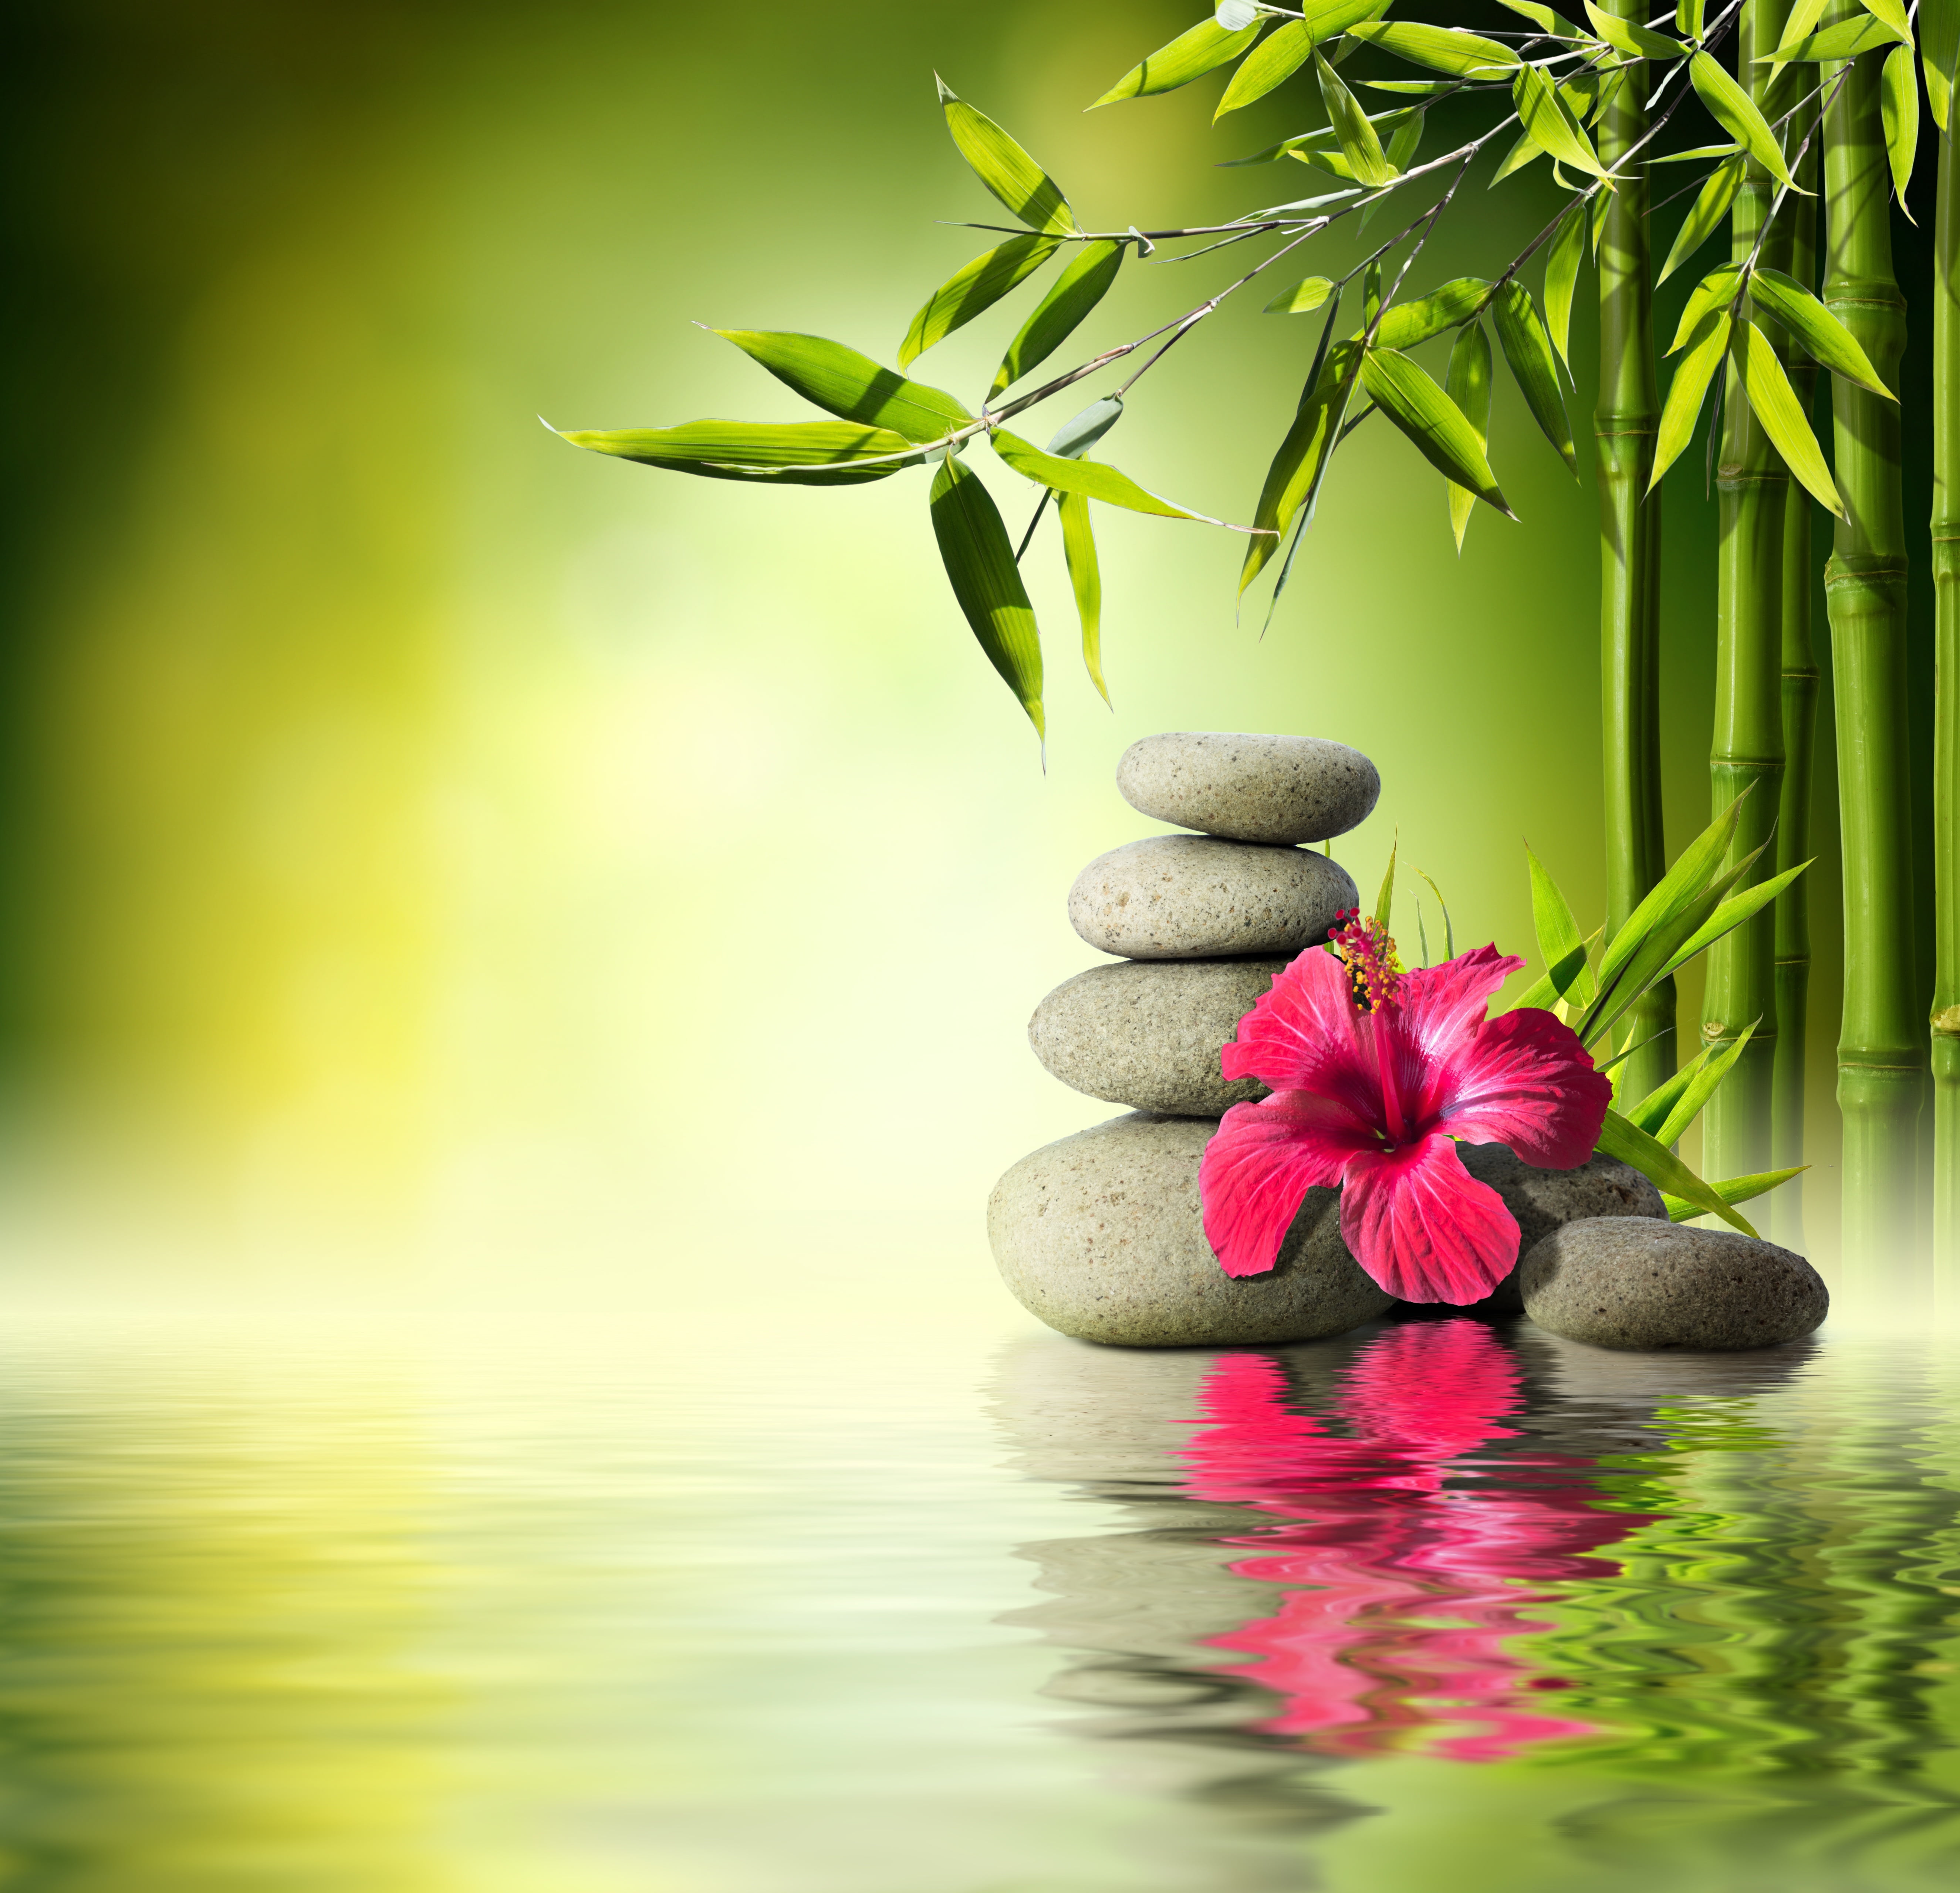 gray stones near hibiscus, flower, water, bamboo, orchid, reflection